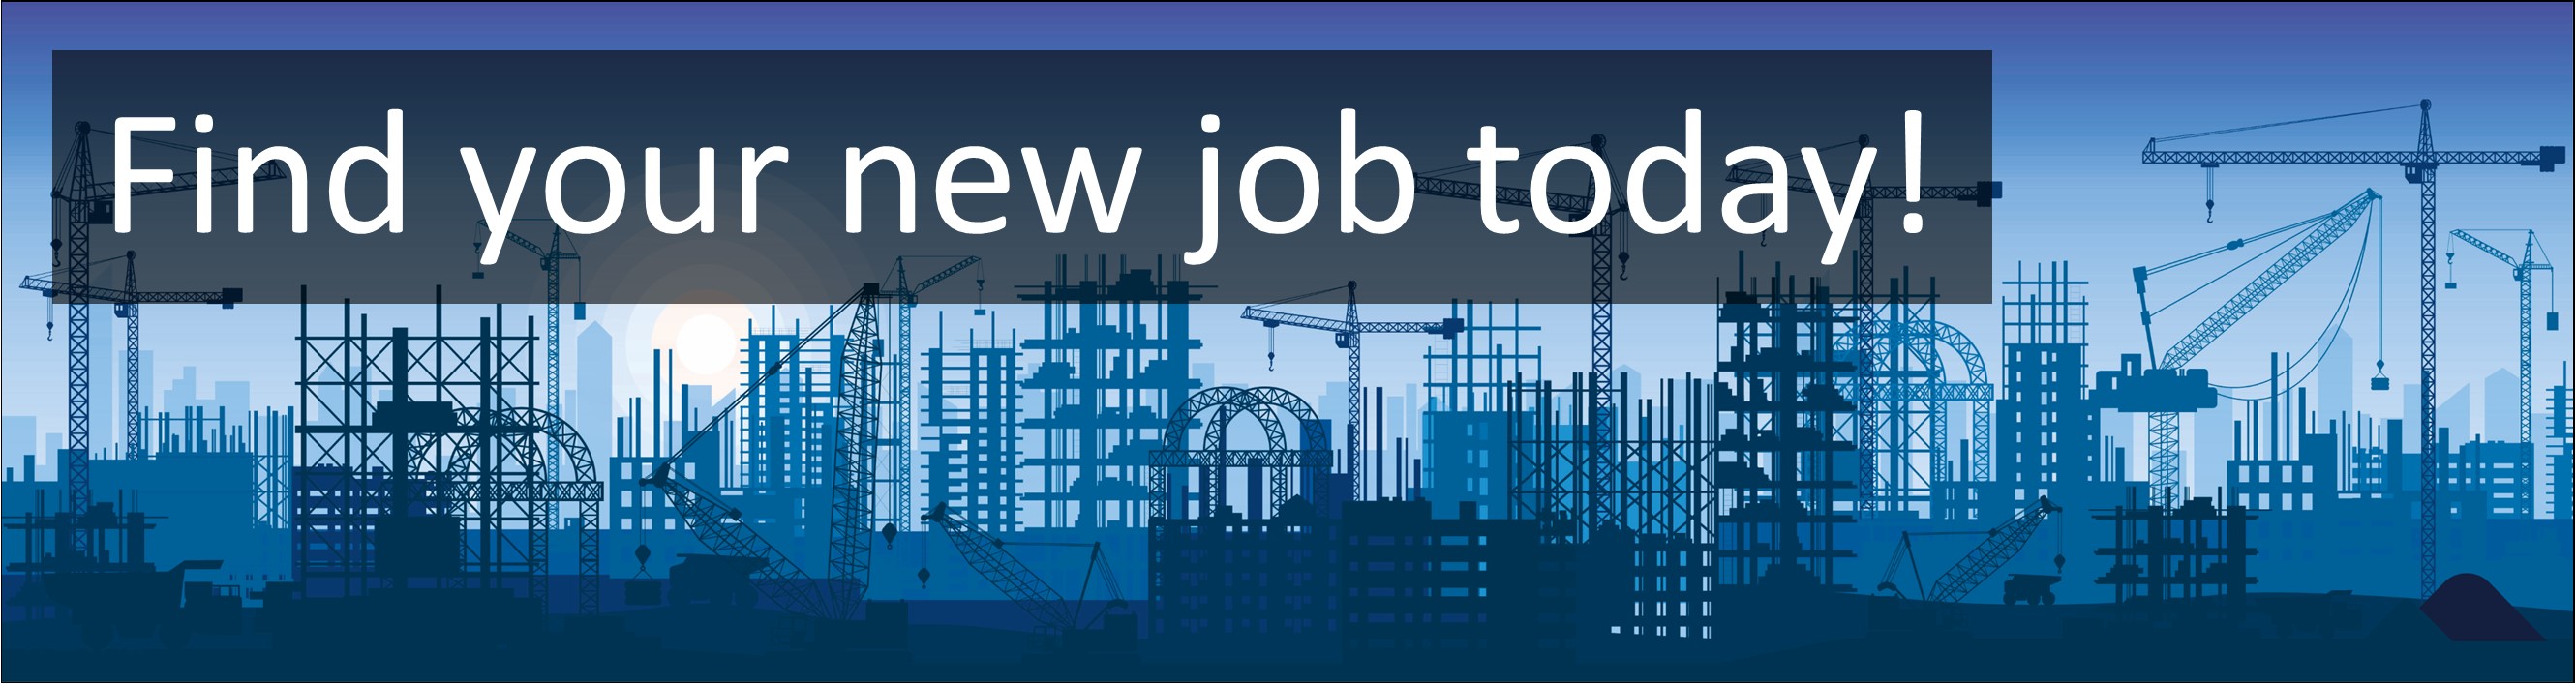 Construction & Trades Jobs. Farming Equipment and Agronomist Precision Support Specialist Jobs, Careers & Vacancies in Scotland Advertised by AWD online – Multi-Job Board Advertising and CV Sourcing Recruitment Services